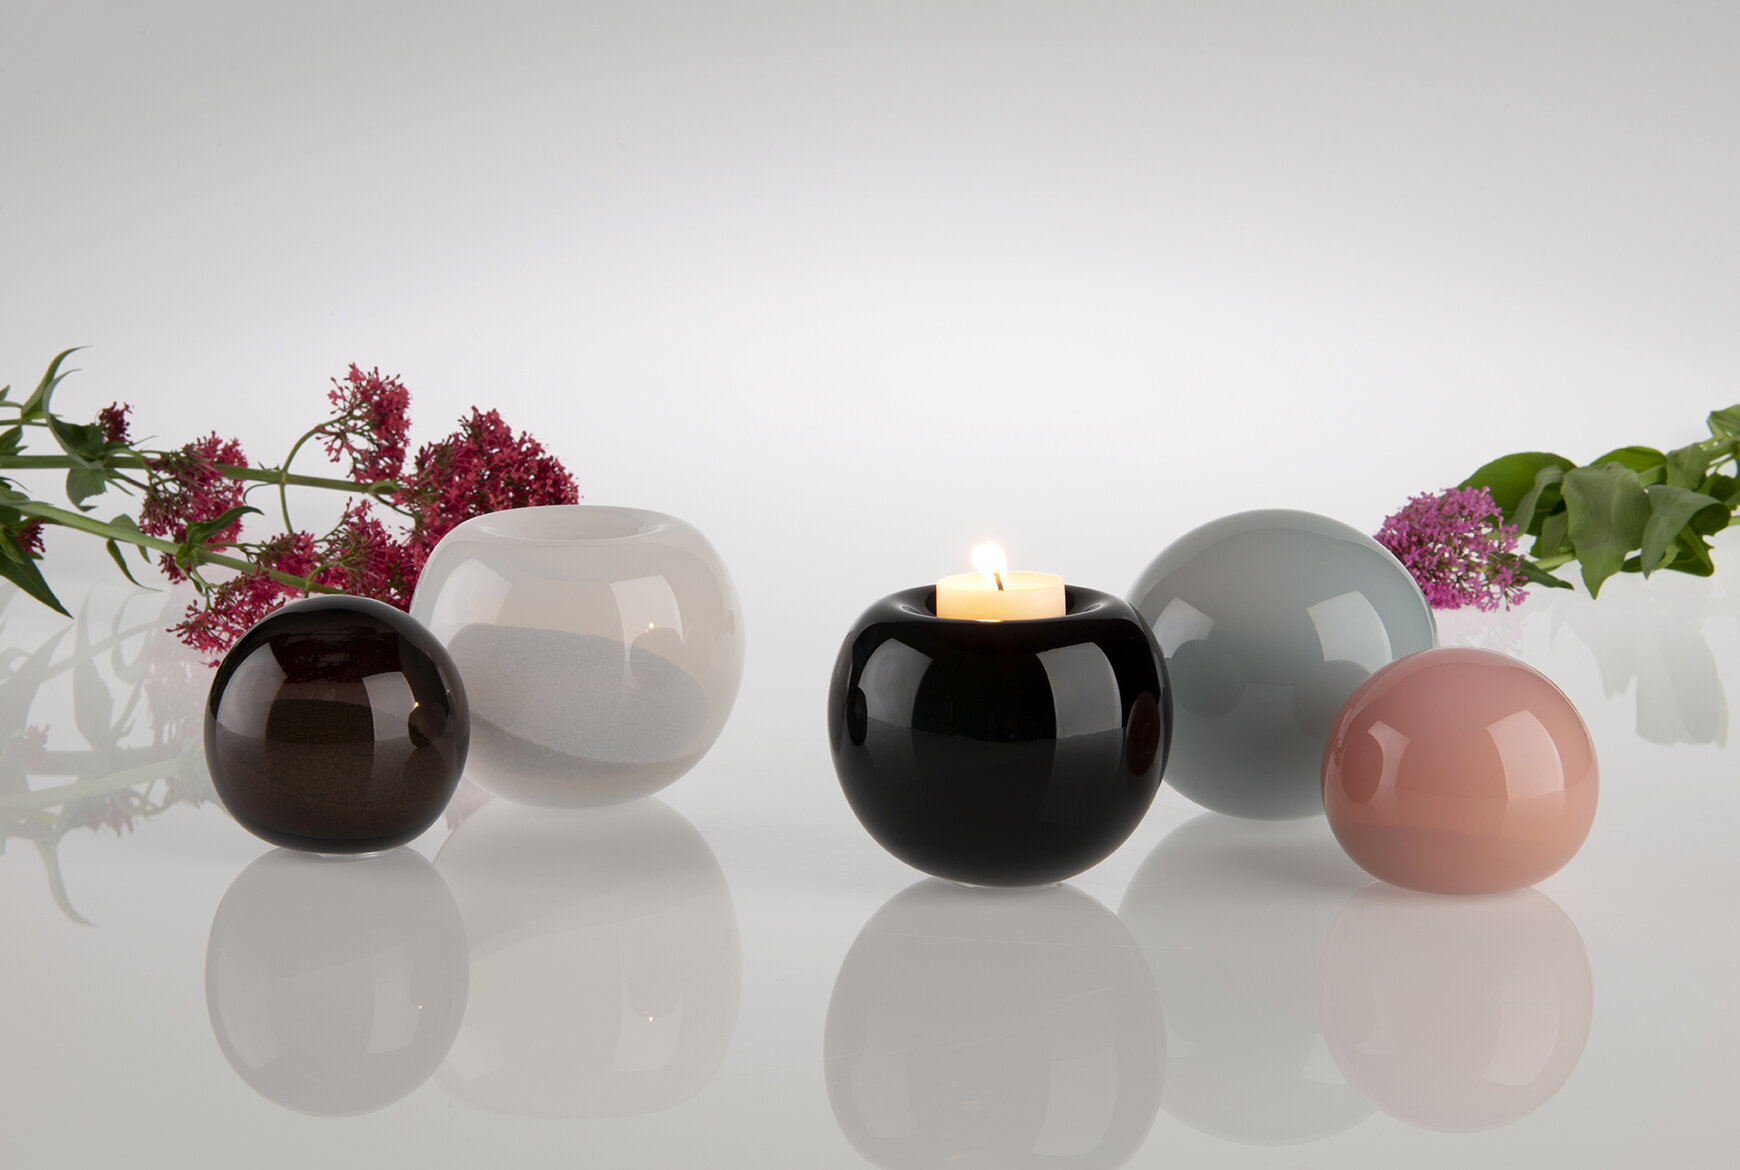   Our Memento Urns    Remember your loved ones in an everlasting way 